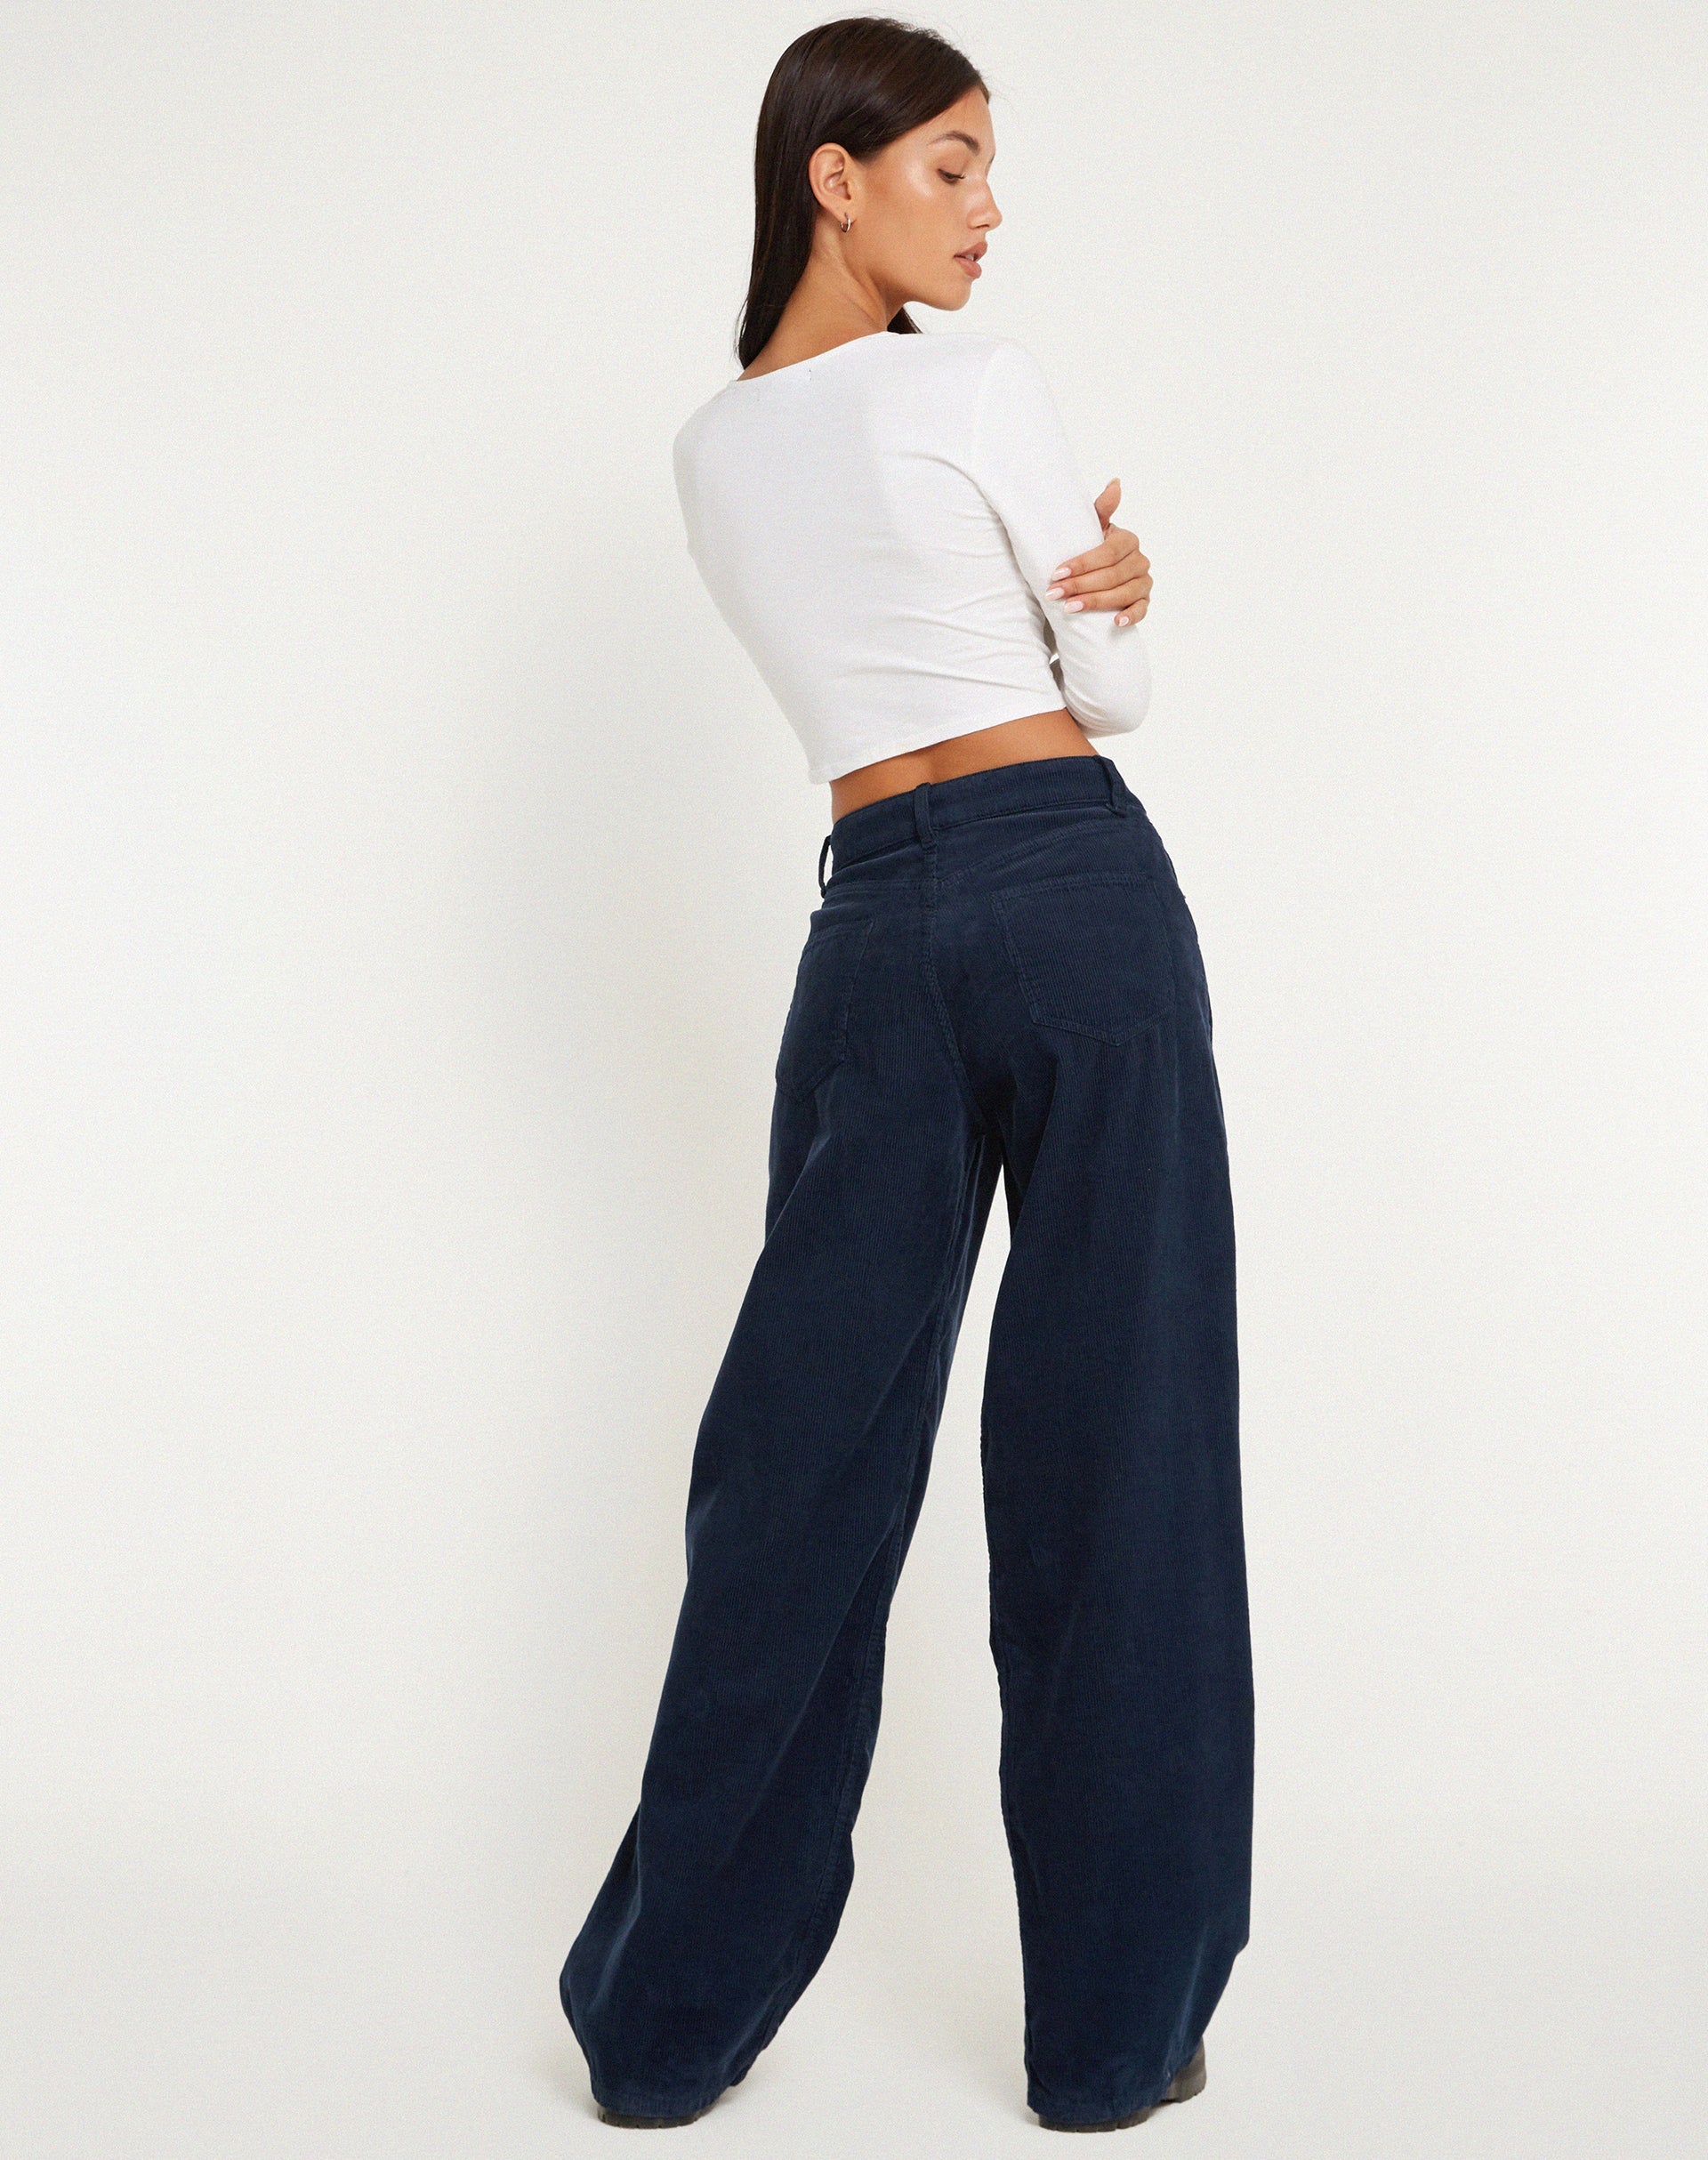 Corduroy Flare Pants for Women High Waisted Baggy Button Up Wide Leg Bell  Bottom Classic Vintage Dressy Pants w/Pocket